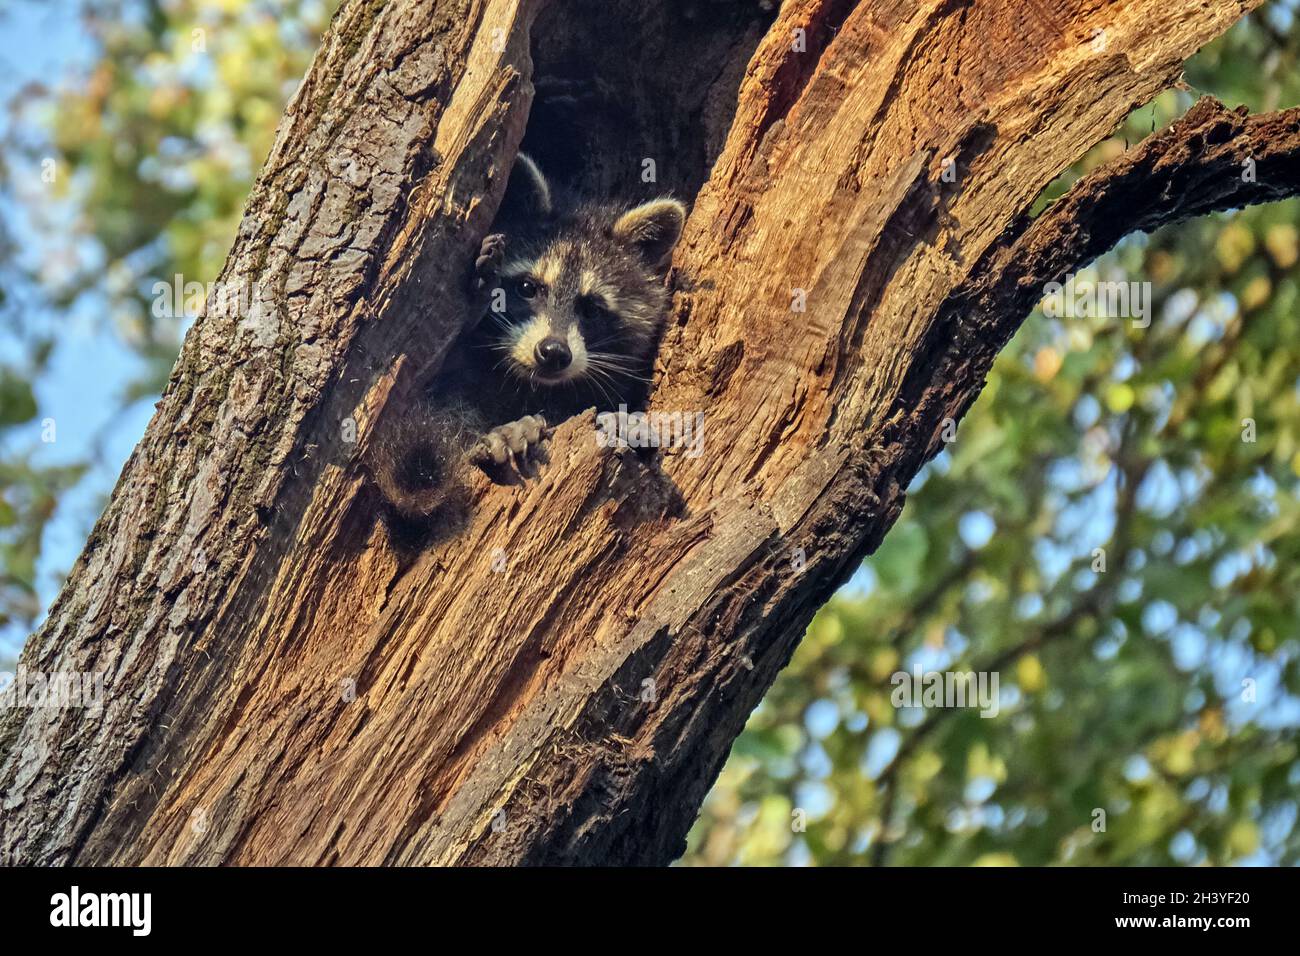 Young North American Raccoon (Procyon lotor). Stock Photo